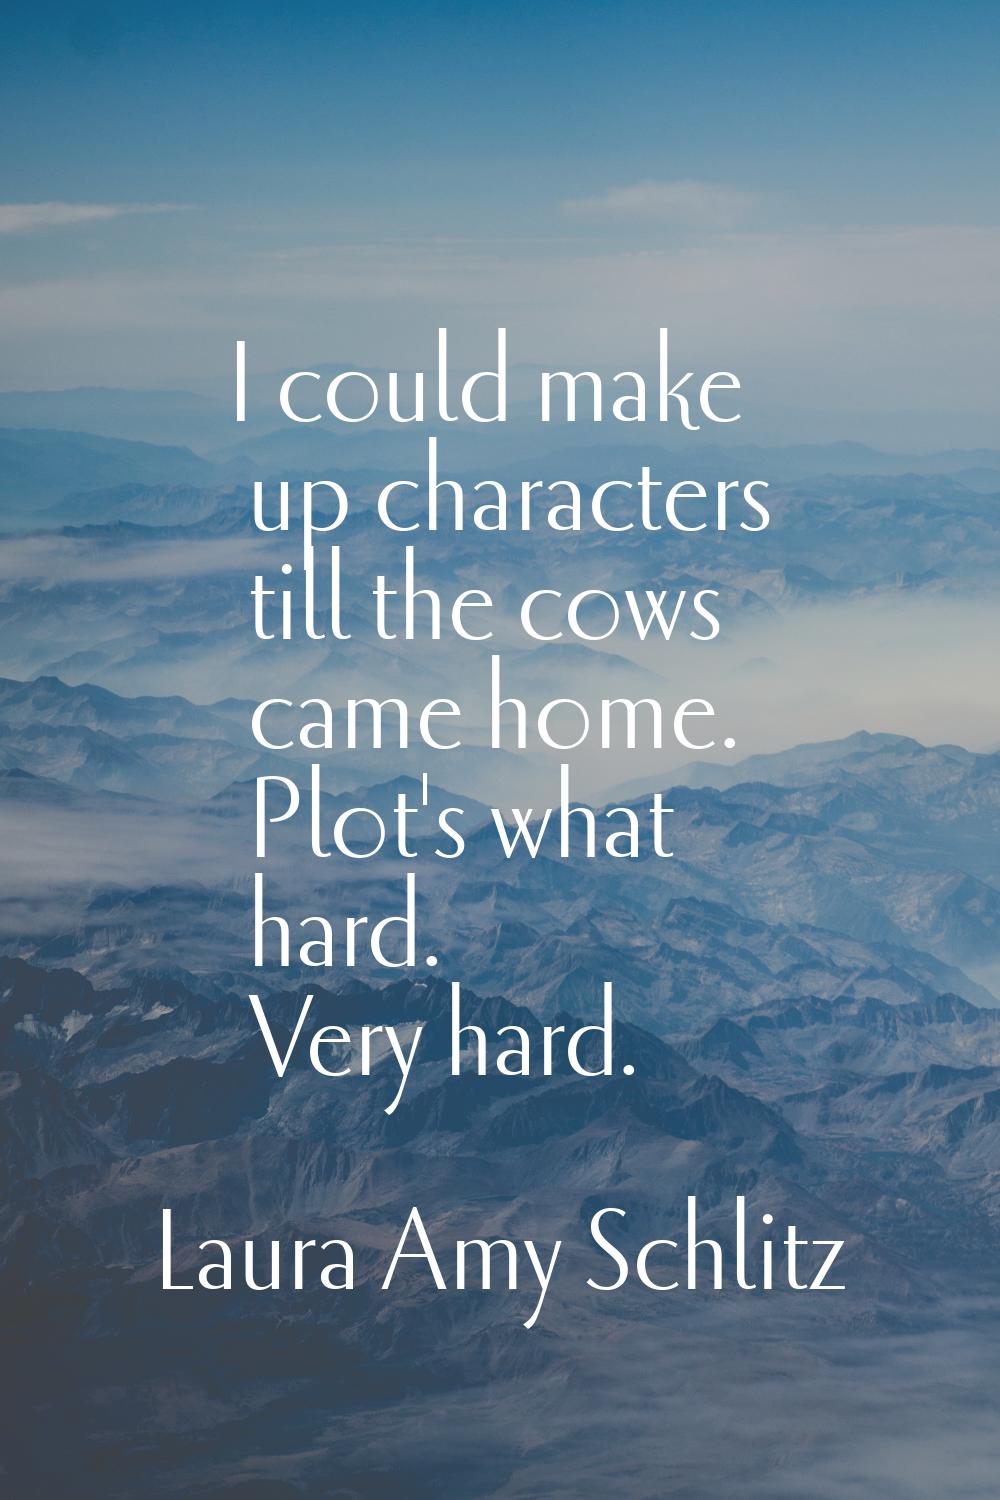 I could make up characters till the cows came home. Plot's what hard. Very hard.